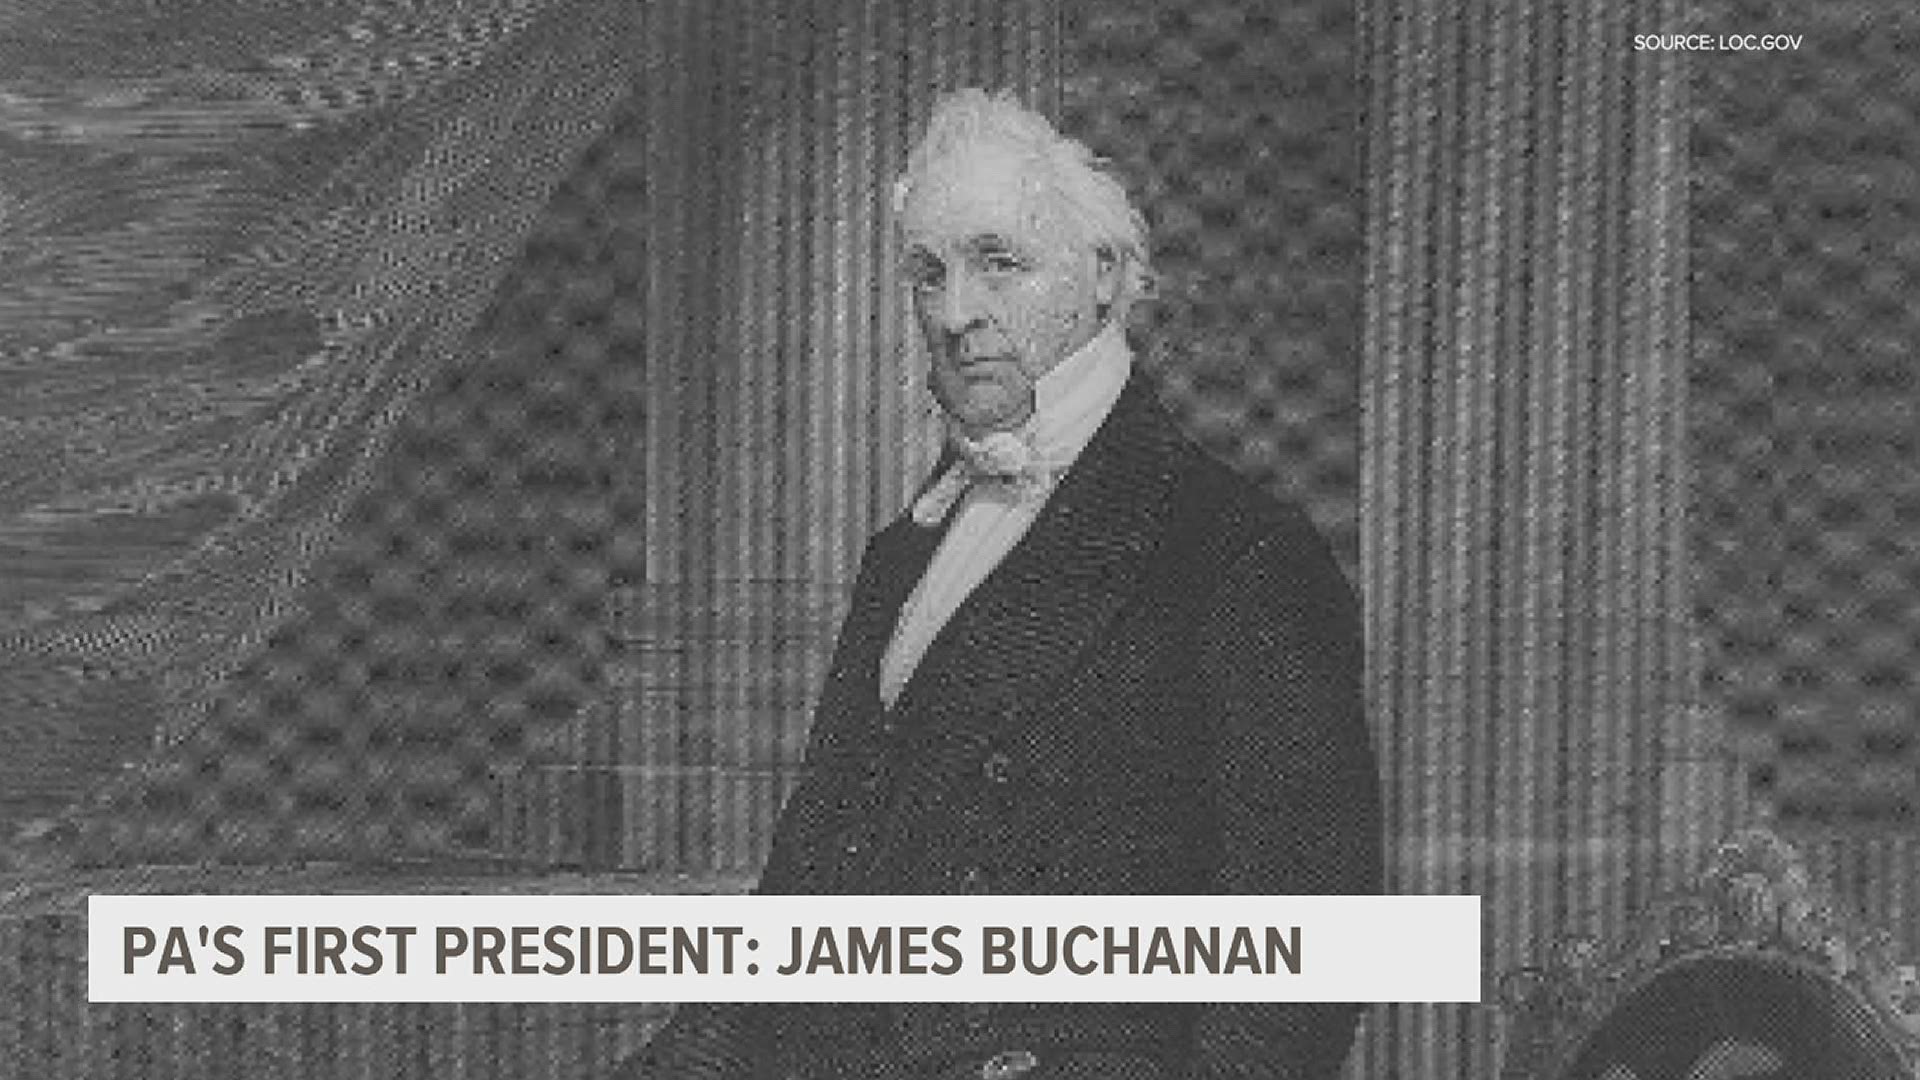 Biden is in fact the second president born in the Keystone State. The first was President James Buchanan, who was in office from 1857 to 1861.